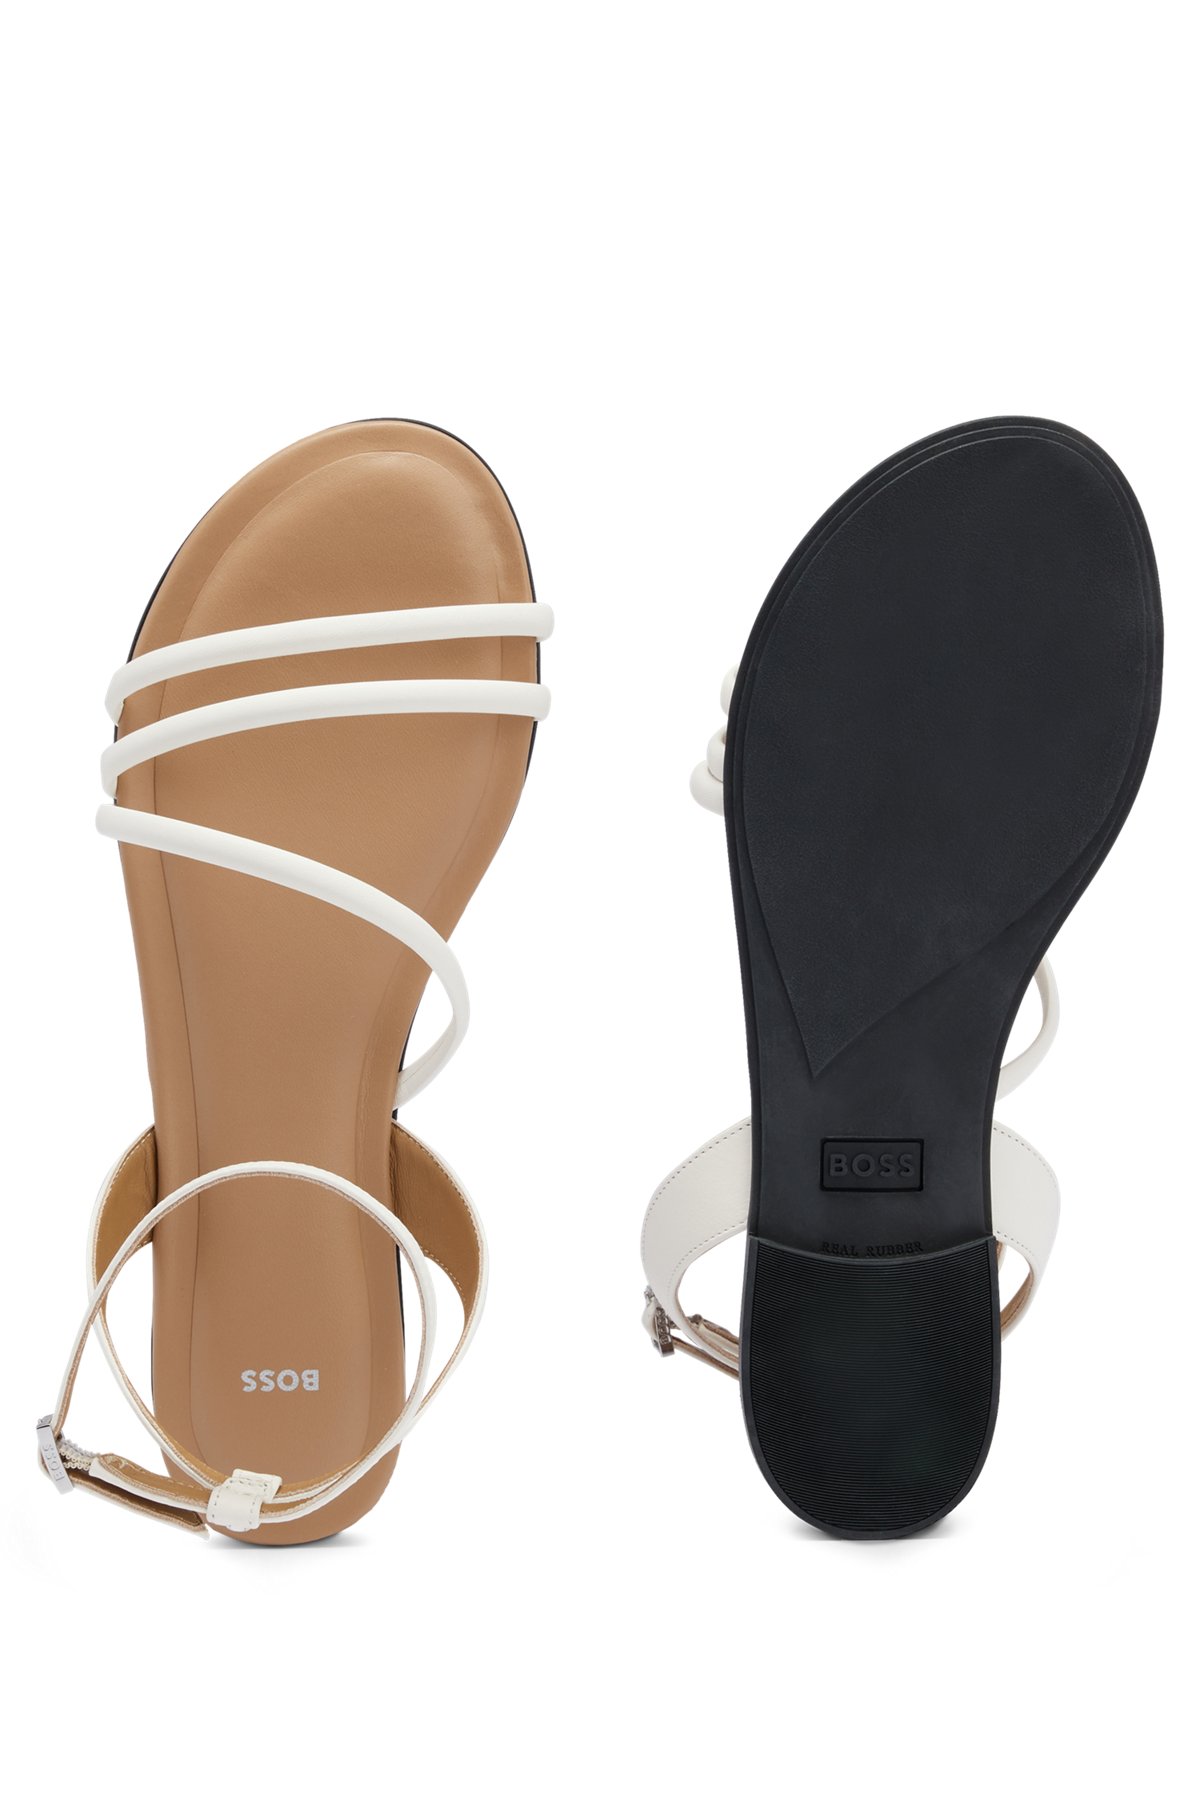 Nappa-leather strappy sandals with flat sole, White